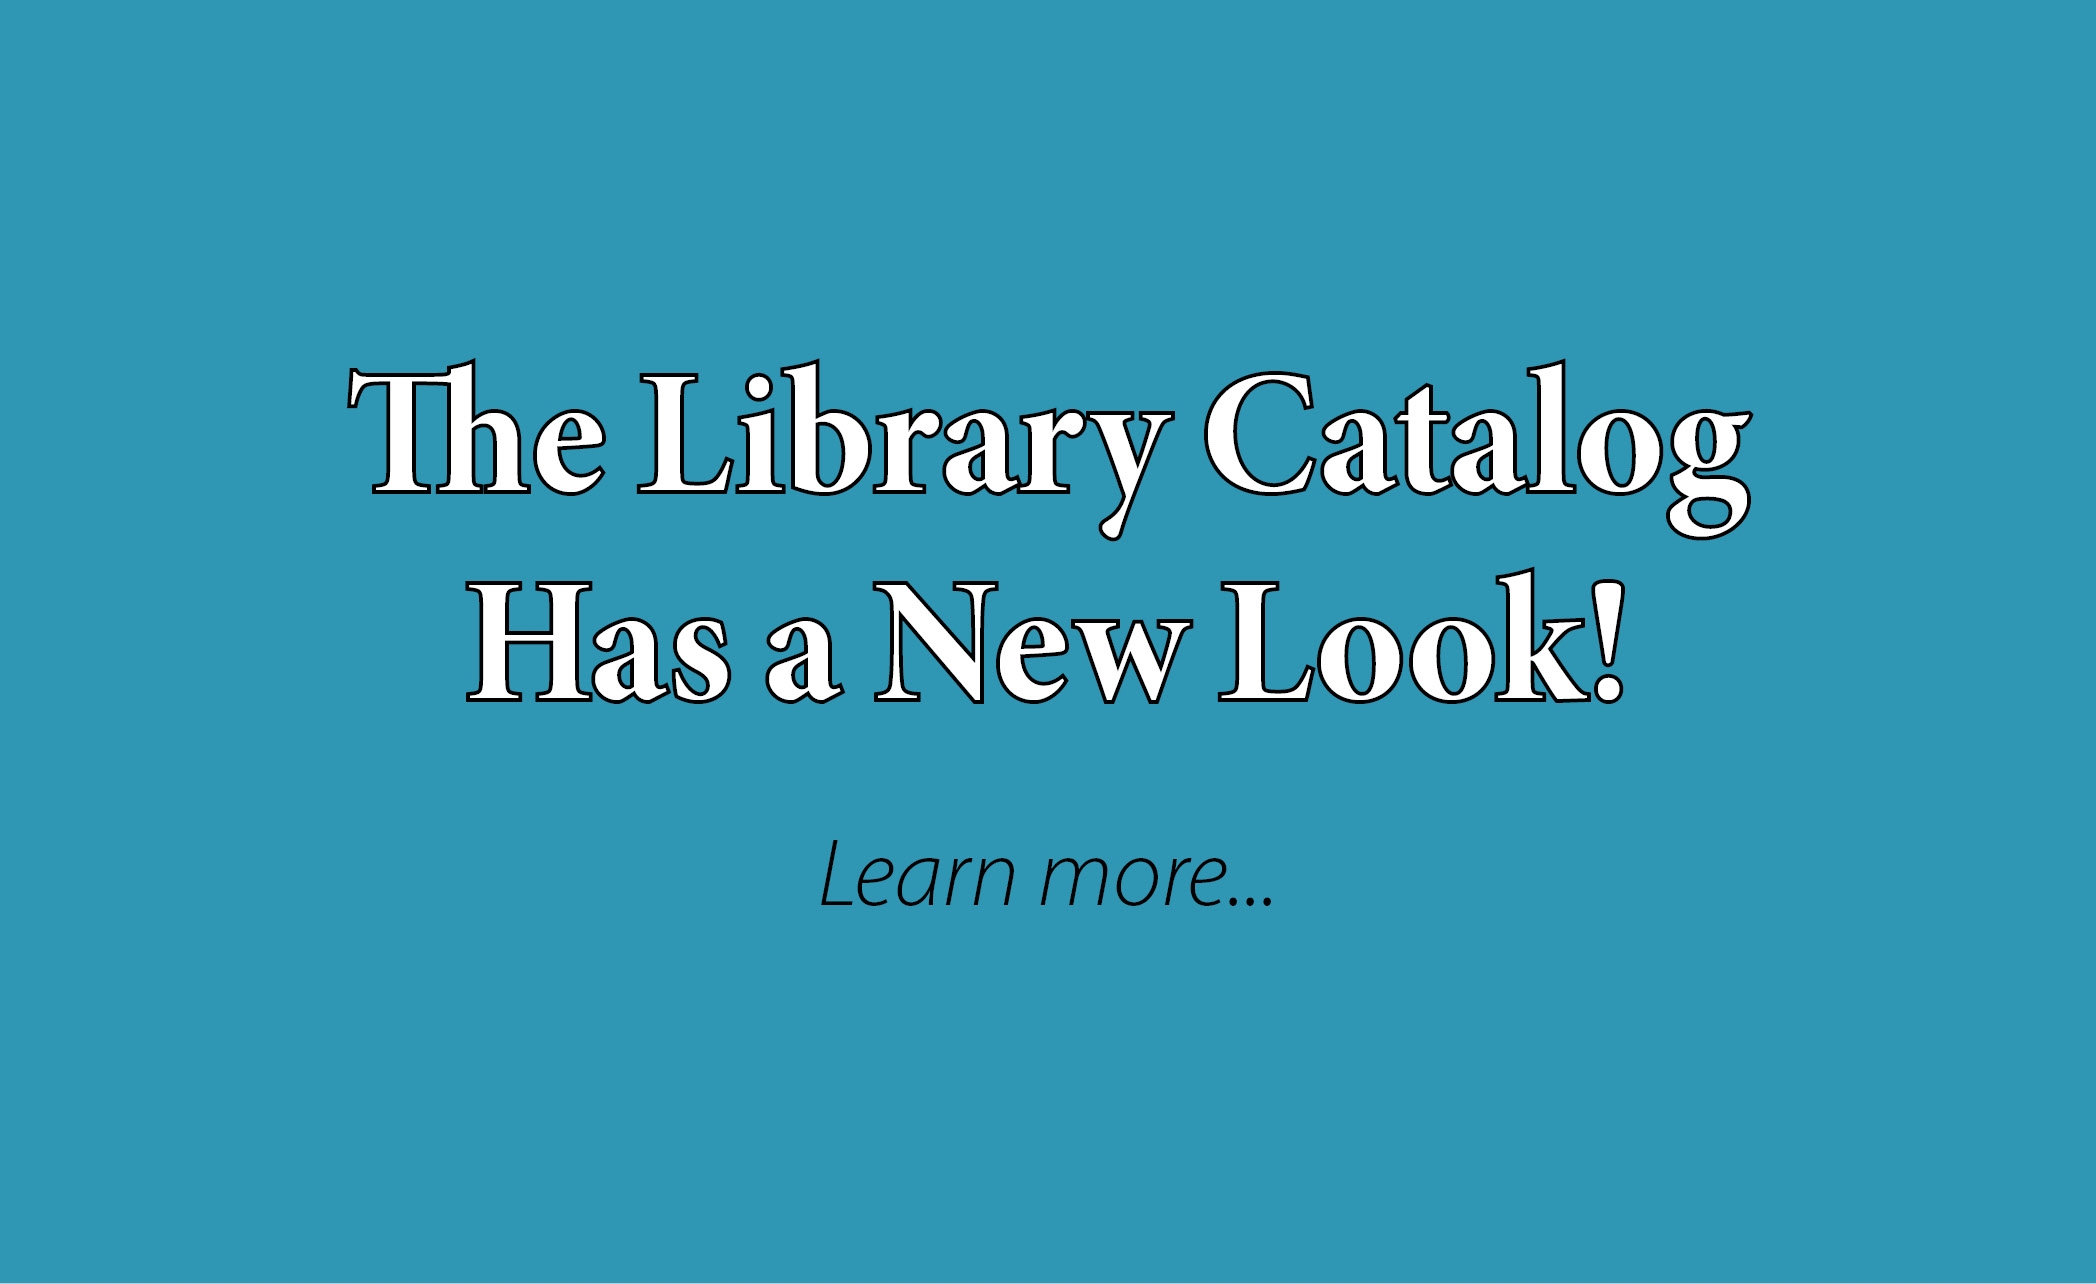 The Library Catalog Has a New Look